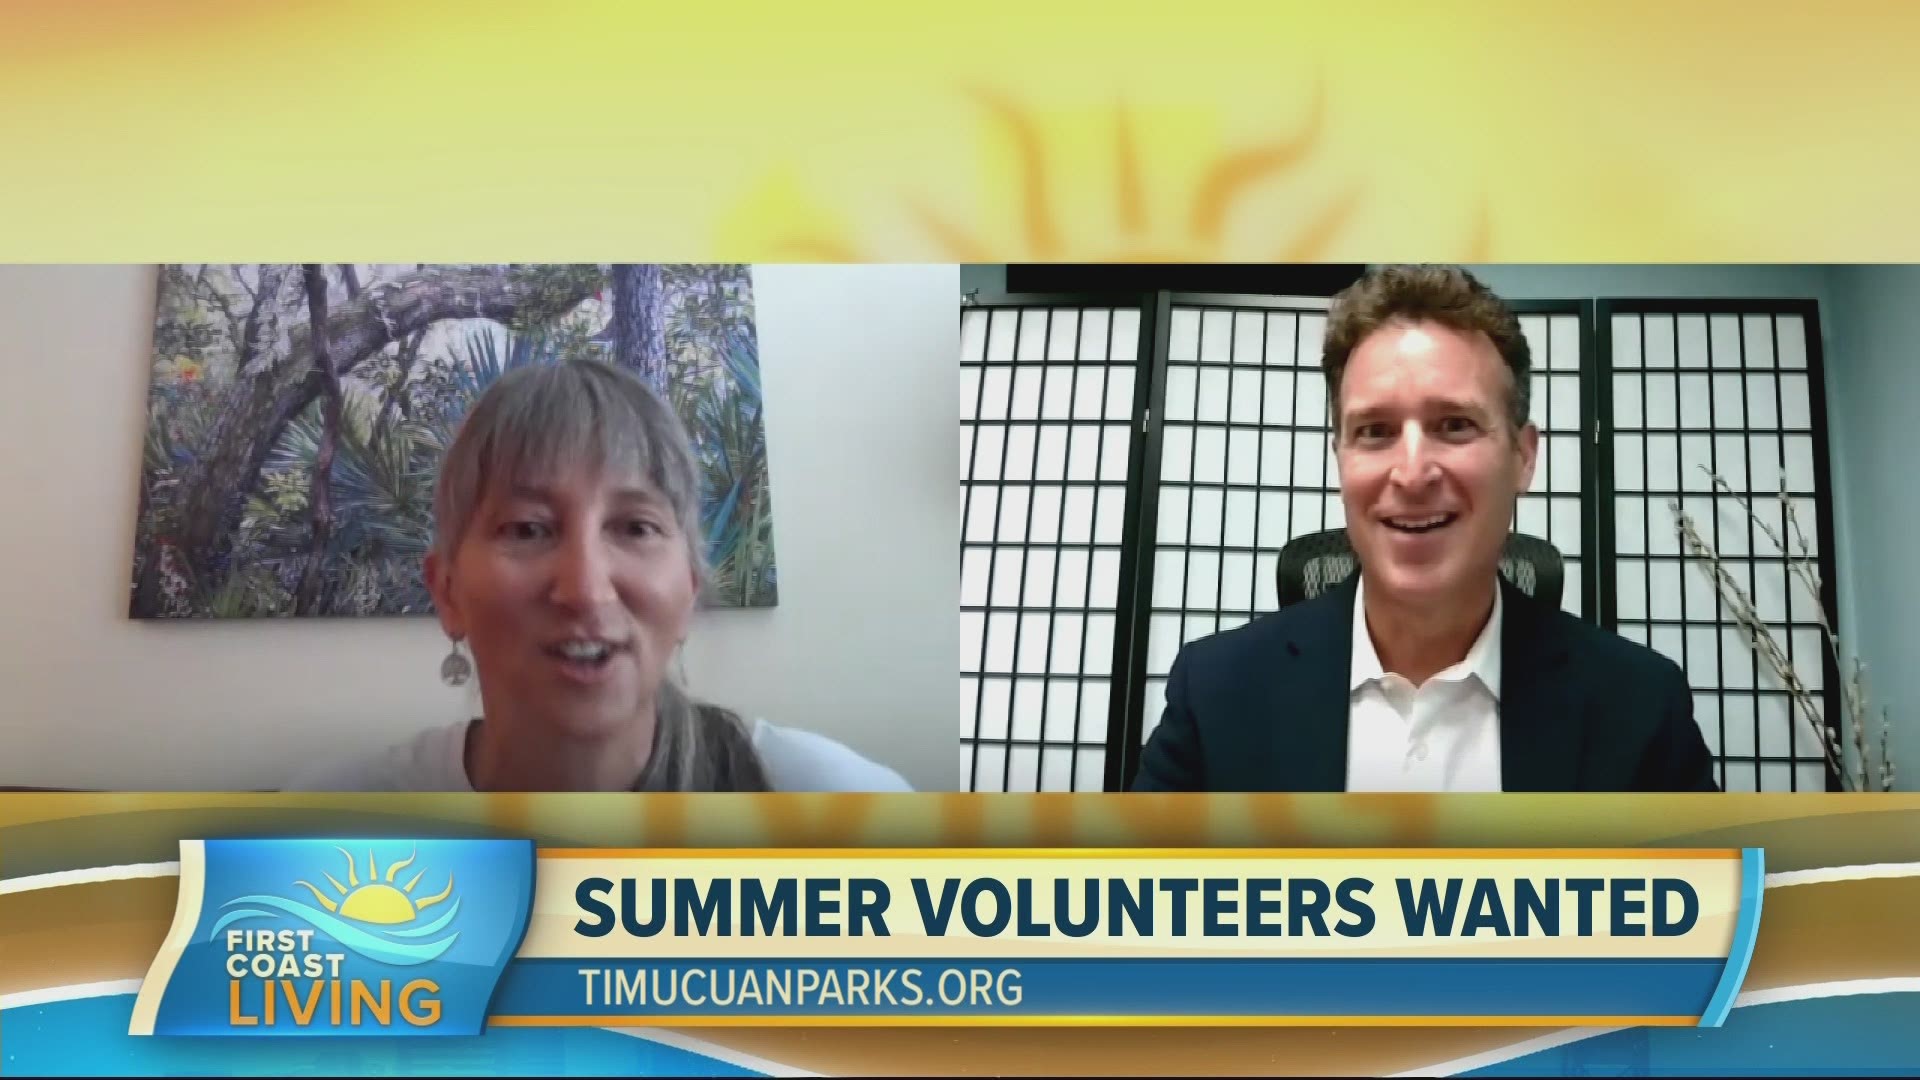 Looking to volunteer? The Timucuan Parks Foundation is looking for help this summer!